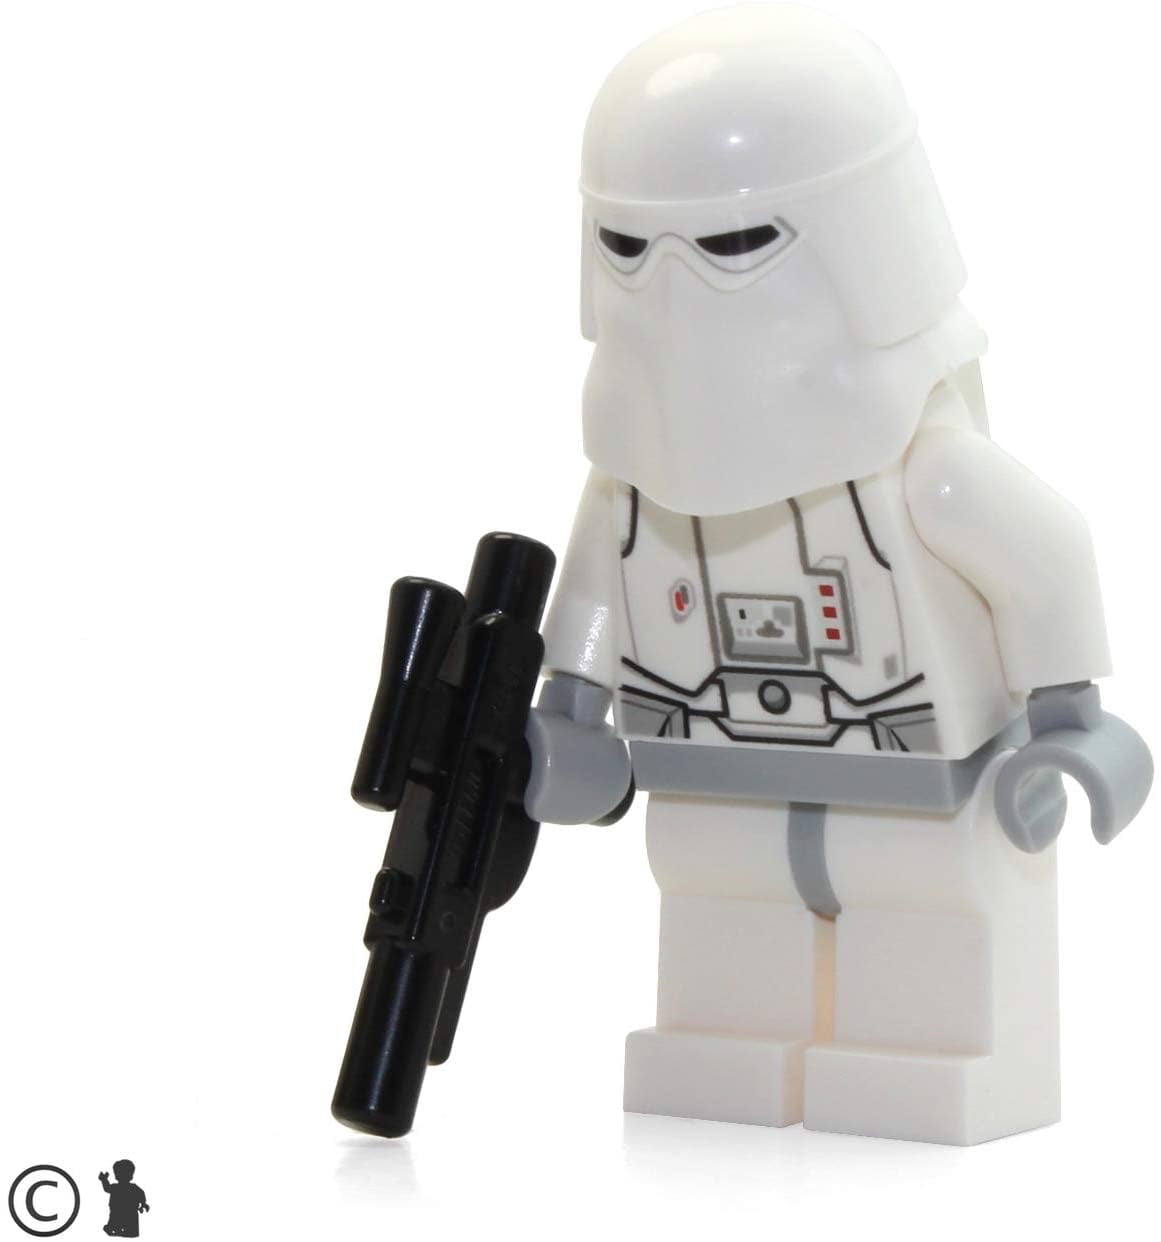 Details about   Lego Star Wars Snowtrooper Dark Tan Hands  Minifigure New Printed Legs